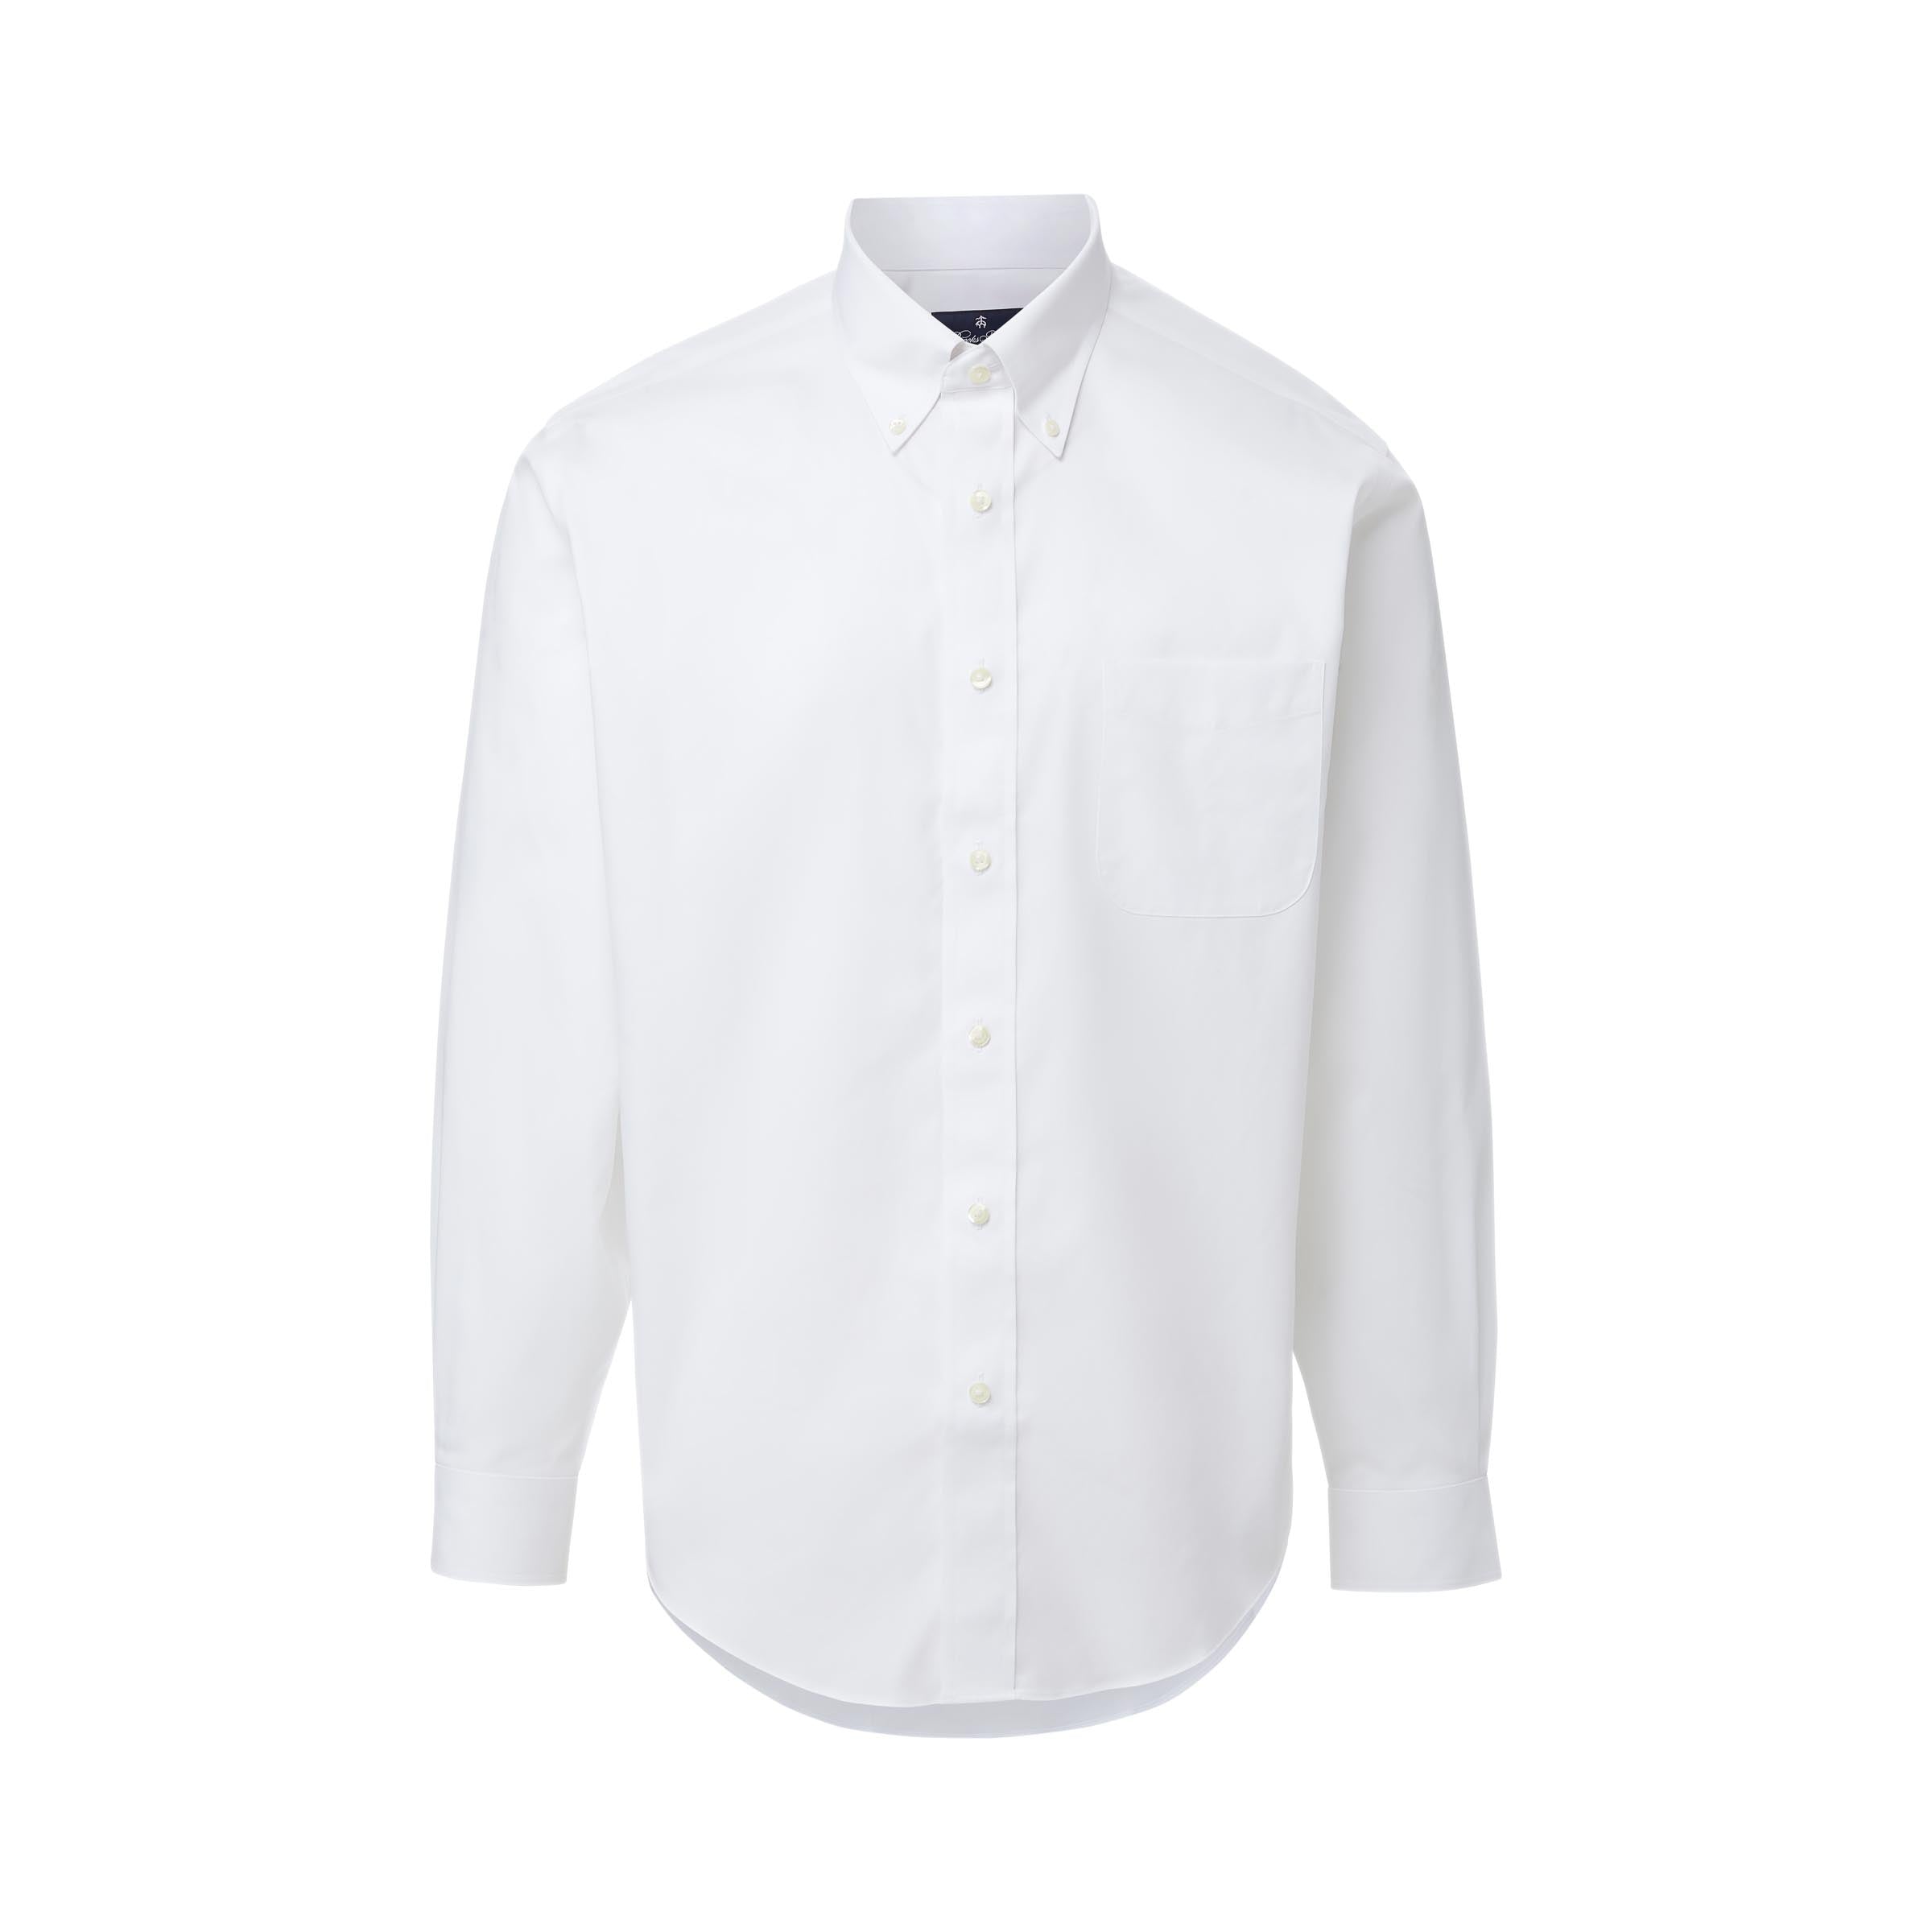 Brooks Brothers  X MagnaReady Stretch Long Sleeve White  Polo Button-Down Collar with Magnetic Closures